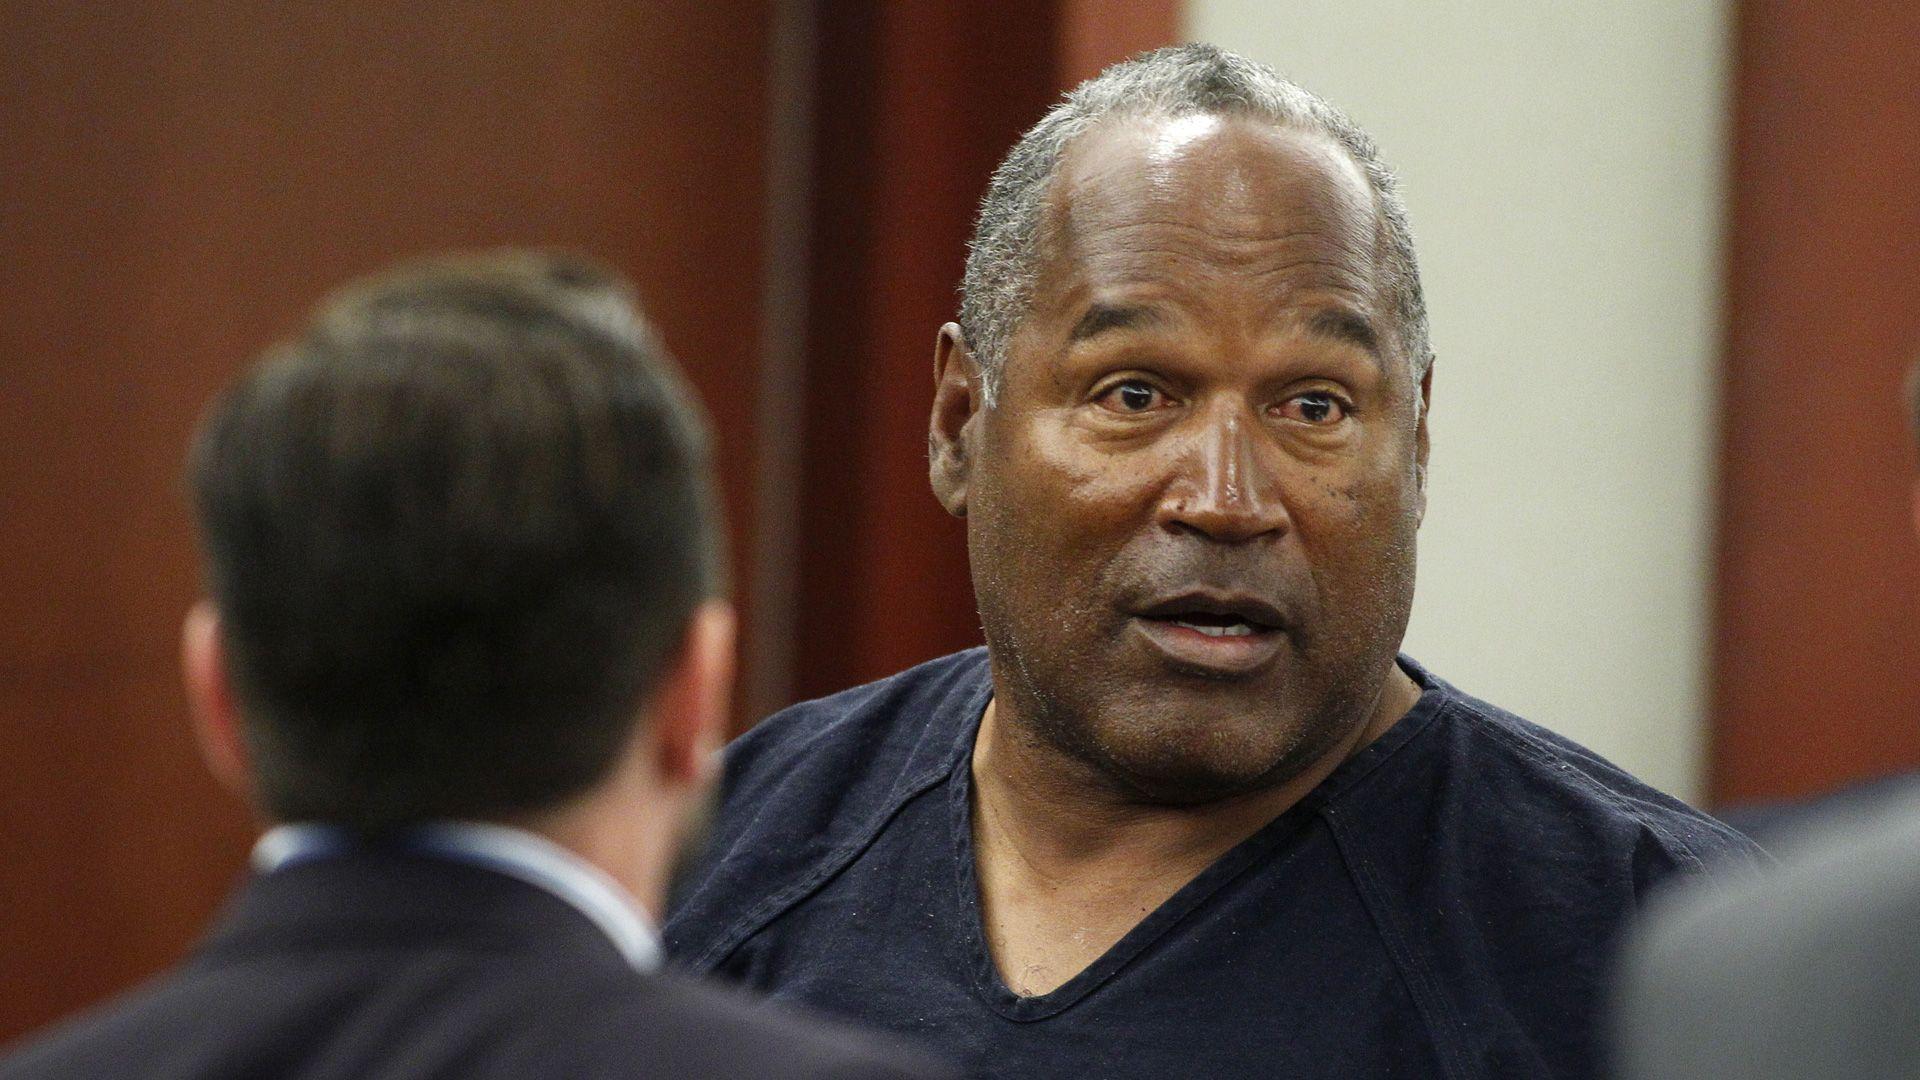 American Crime Story digs up memories of the O.J. Simpson trial